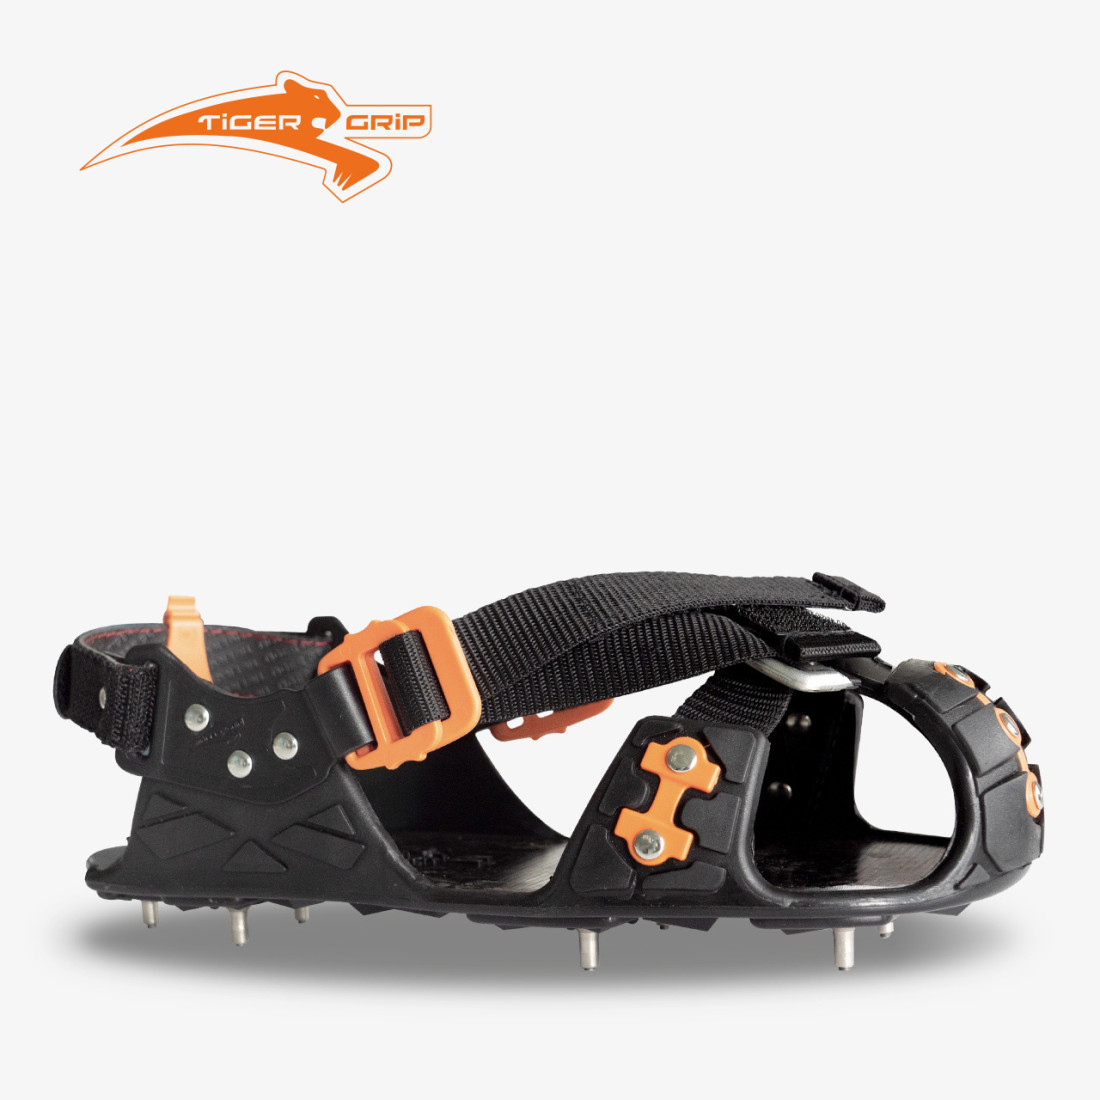 Crampons universels antidérapants WINTER GRIP - Les chaussures de protection